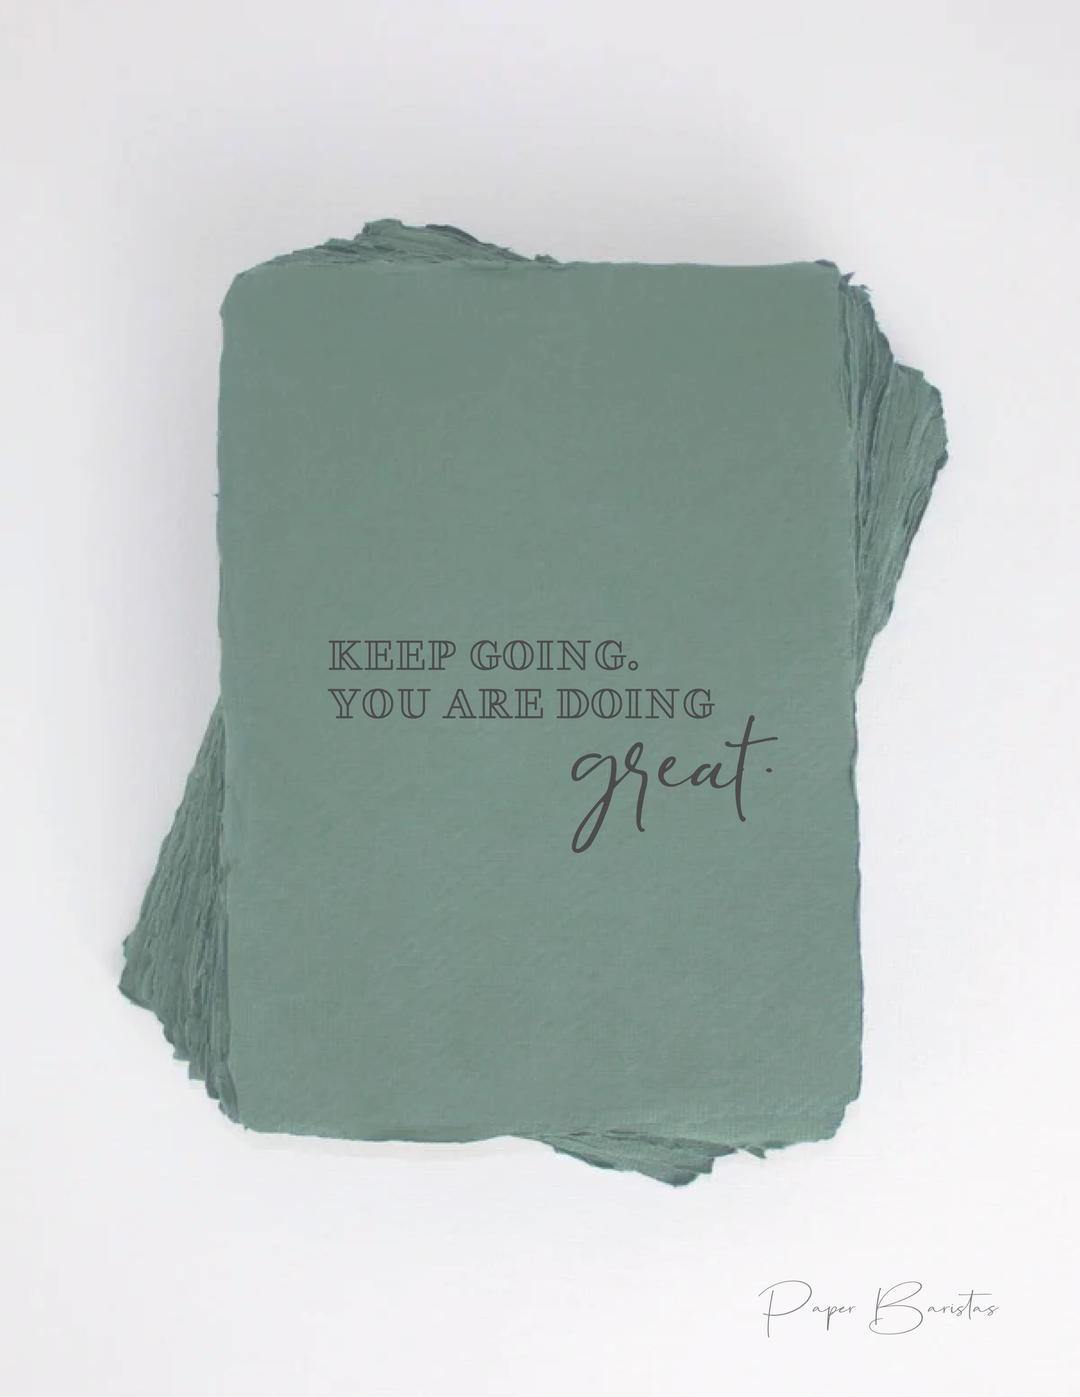 "Keep going. You're doing great" Encouragement Greeting Card